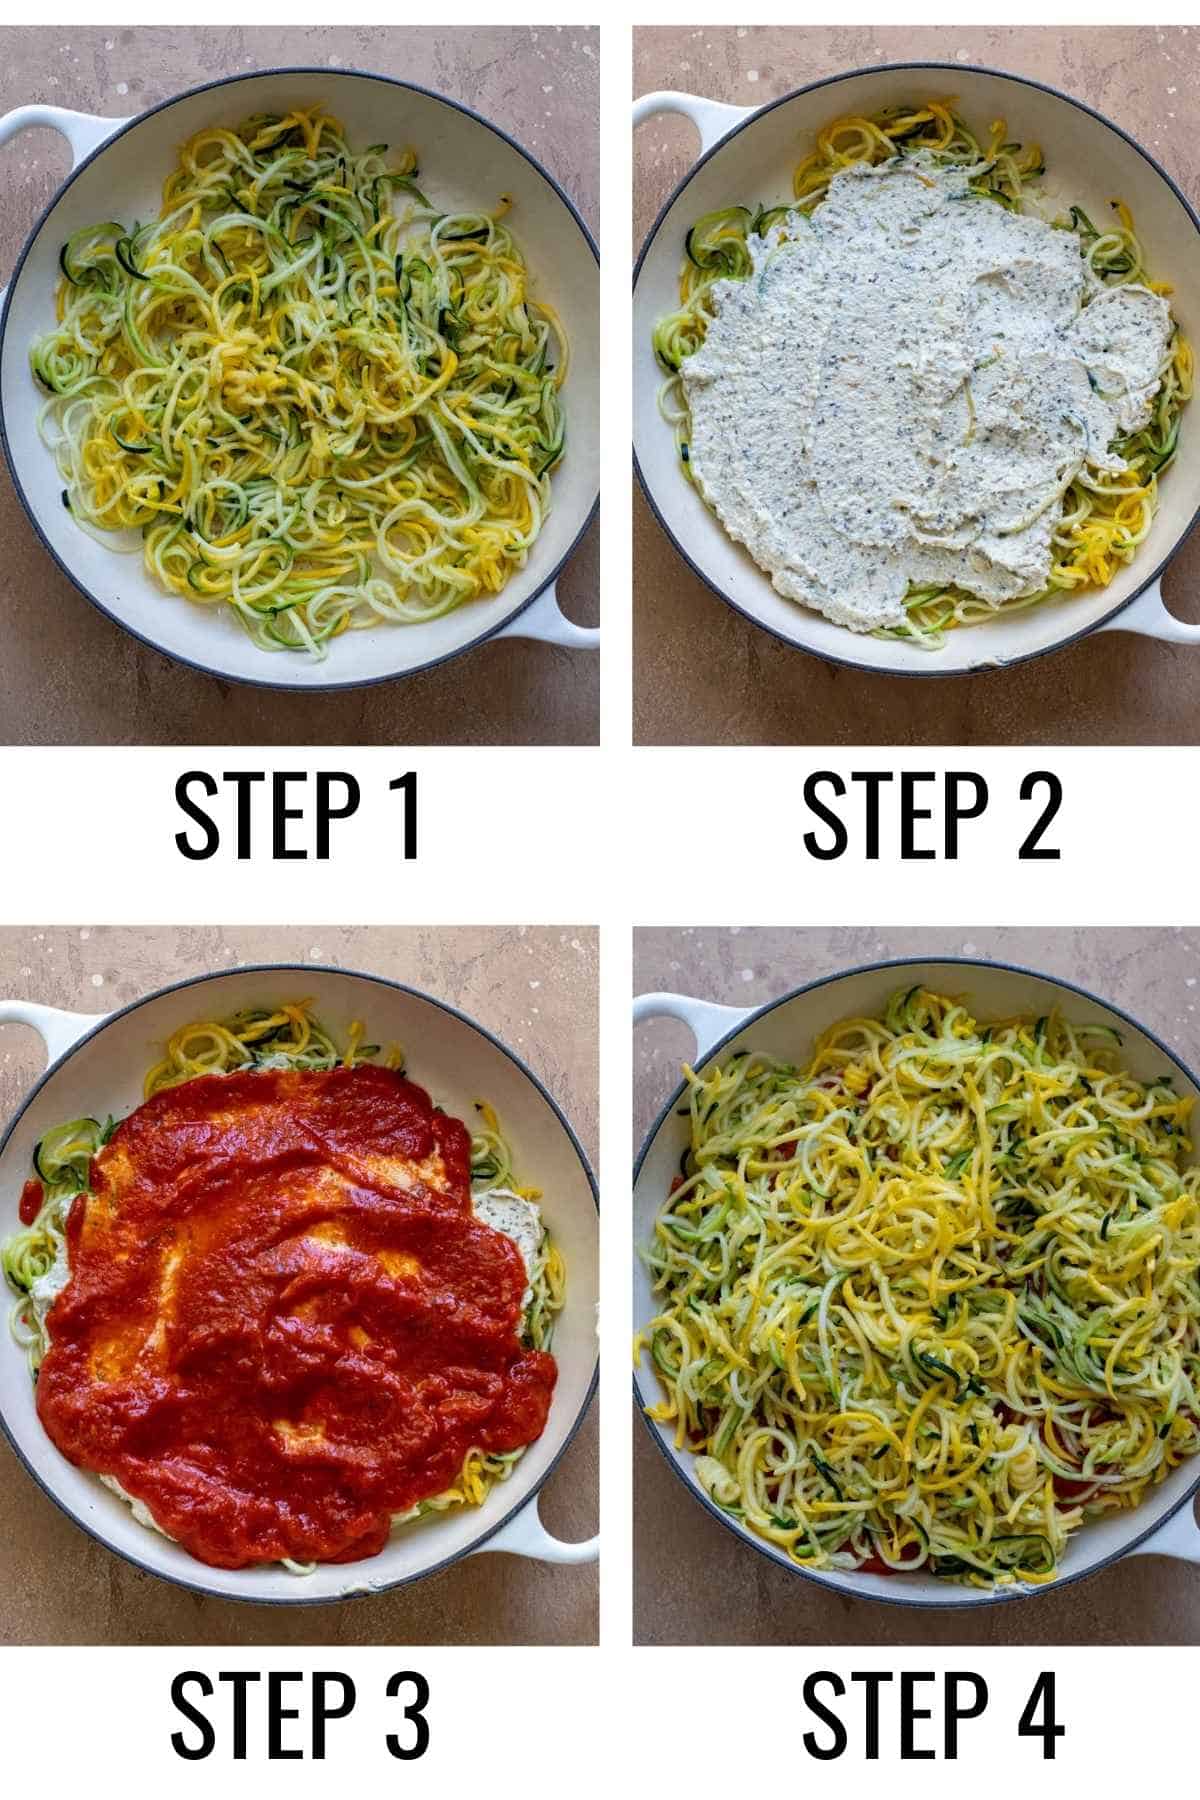 Photos with labeled steps showing step by step process of layering lasagna.